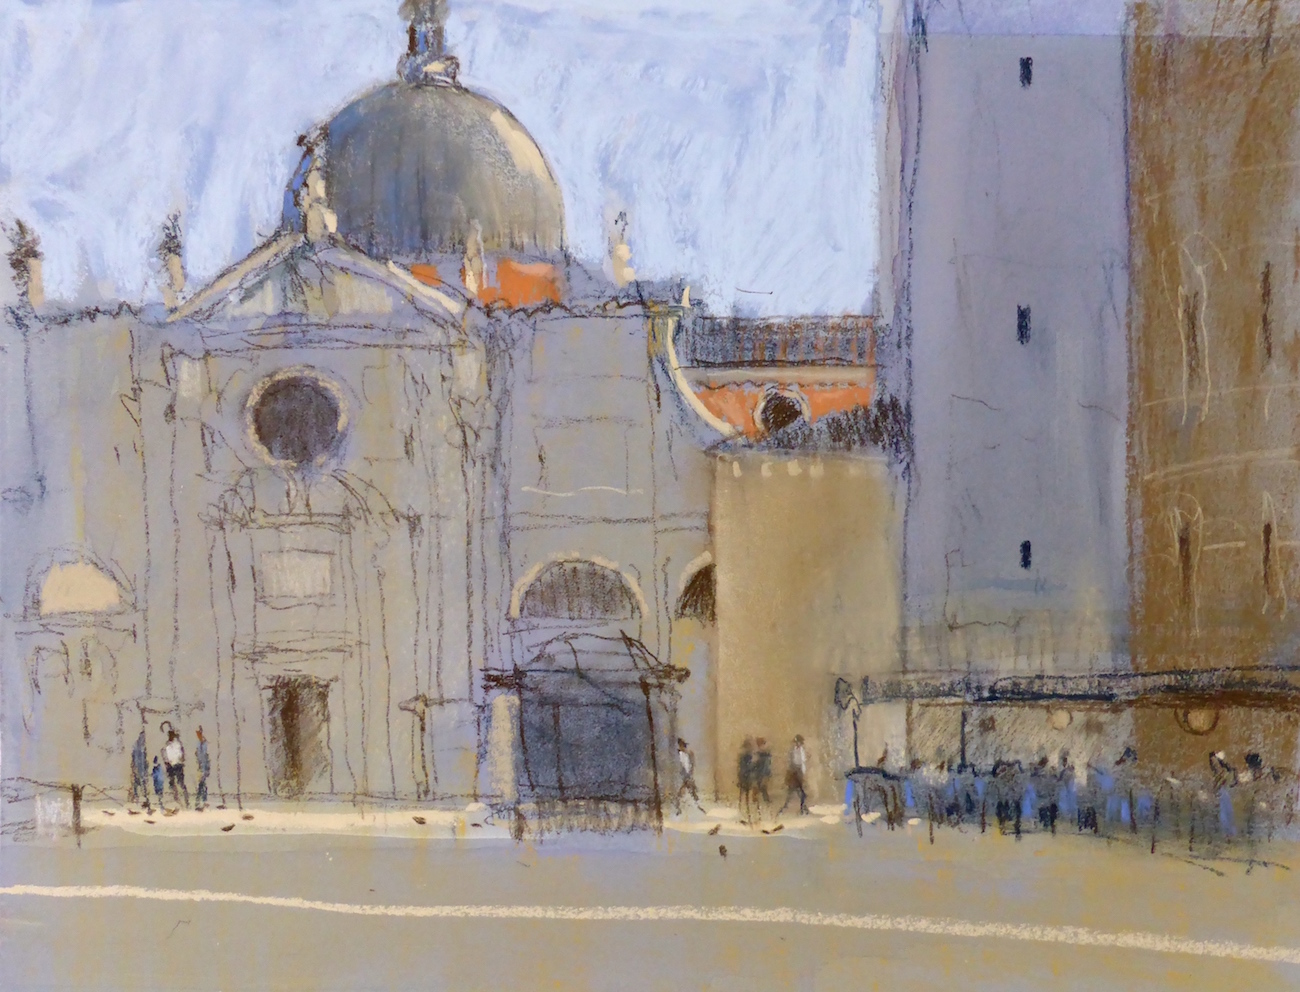 Felicity House, "Campo Santa Maria Formosa, Venice," 2015, assorted pastels on Art Spectrum paper 9 x 11 in. Sold. My favourite square to paint in Venice - lovely vistas, always interesting.